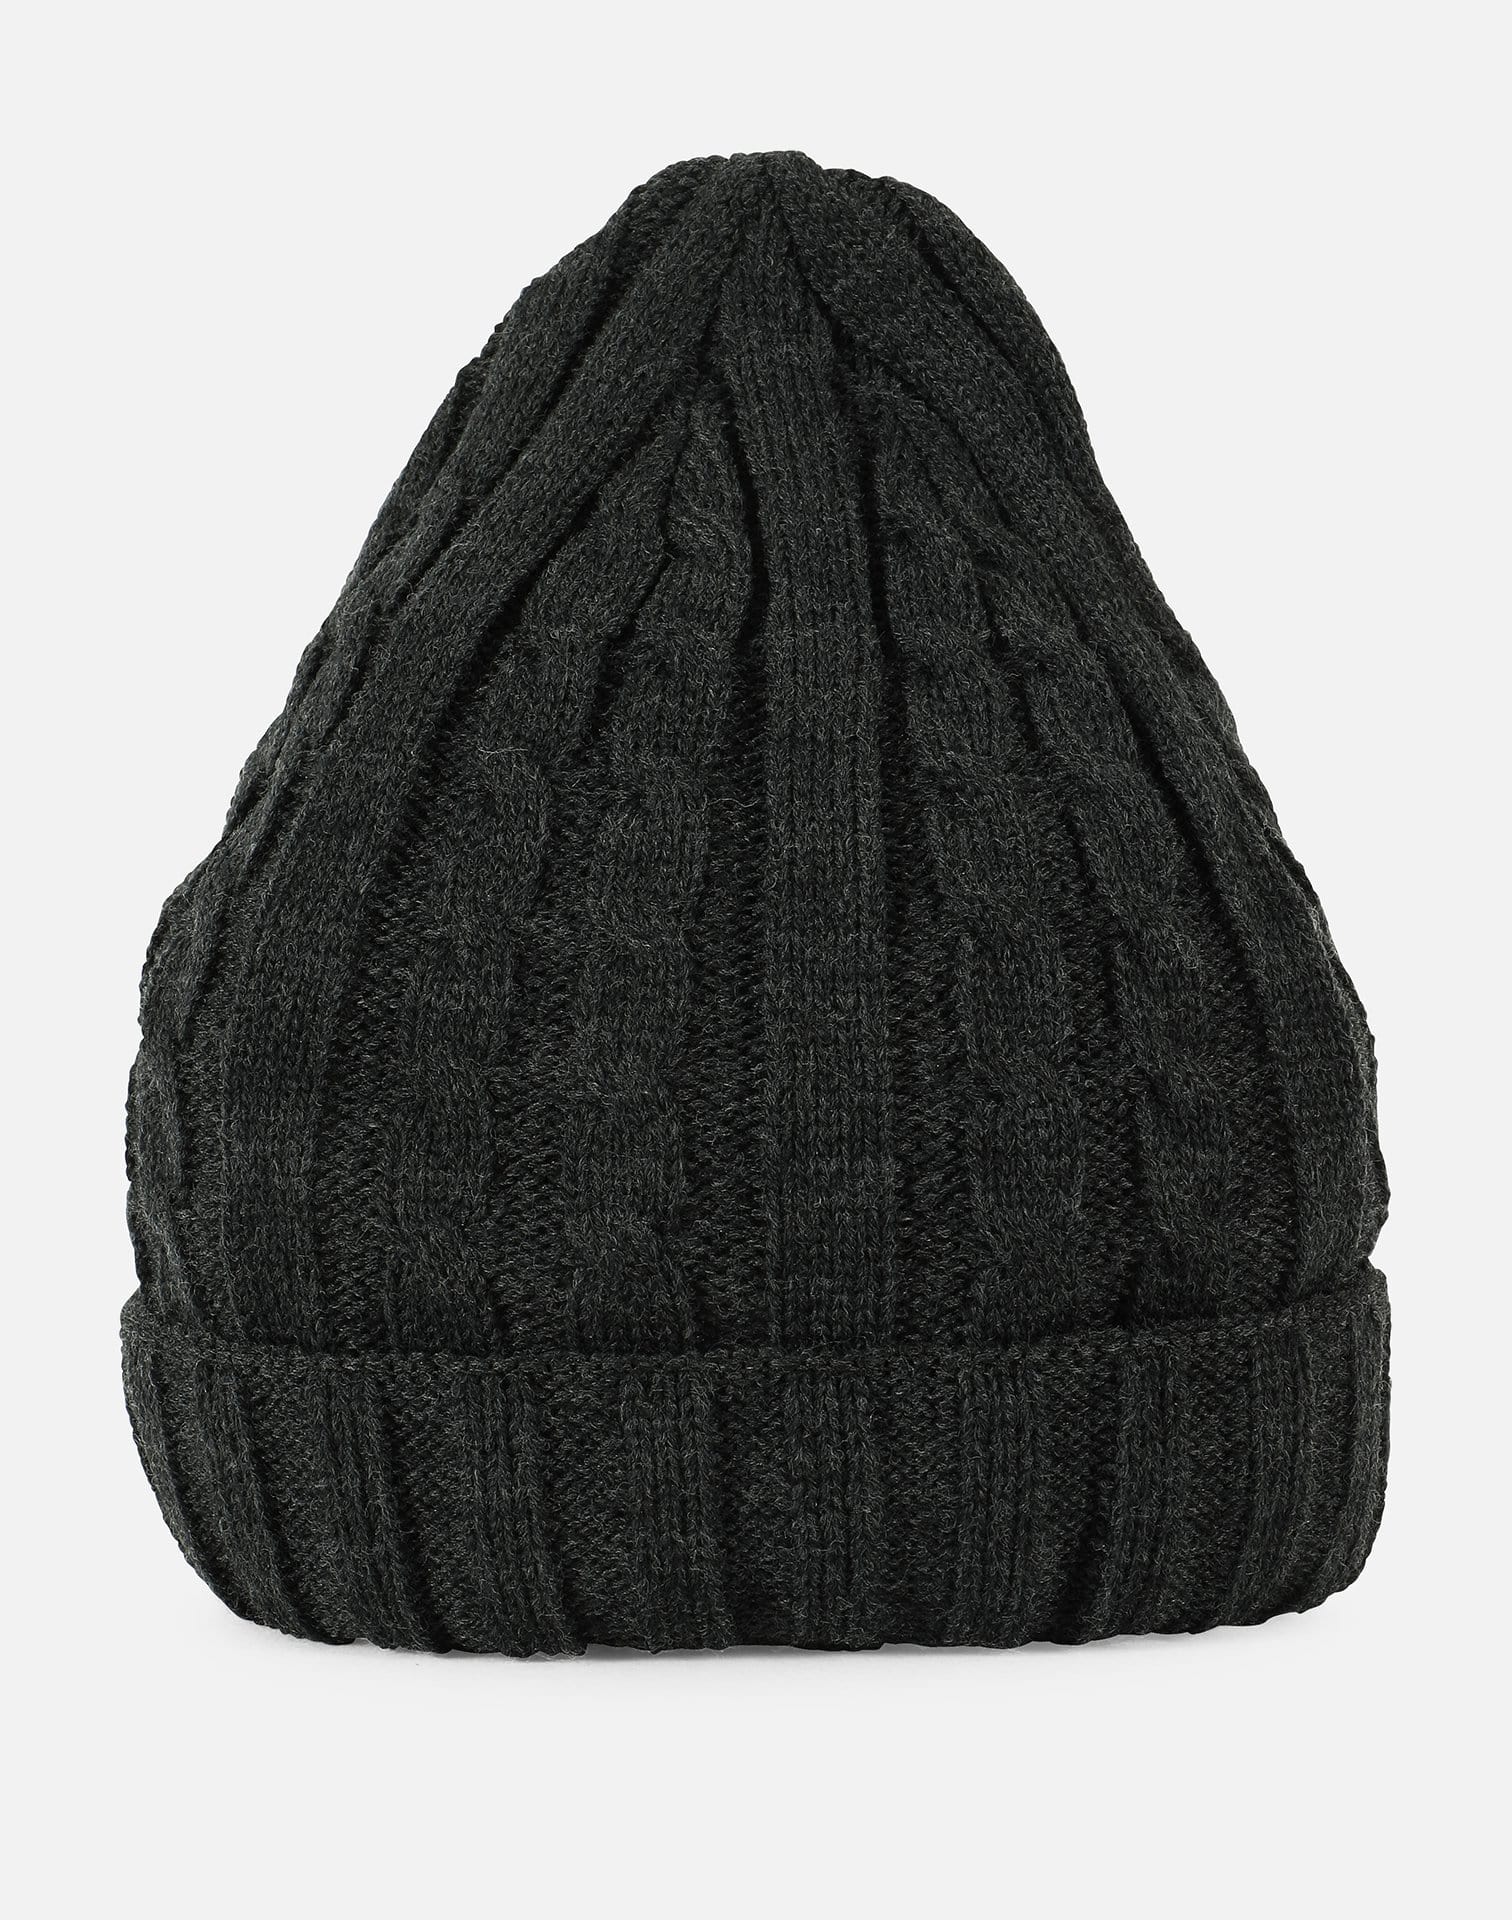 K&B Trading Corp Cable Cuff Beanie